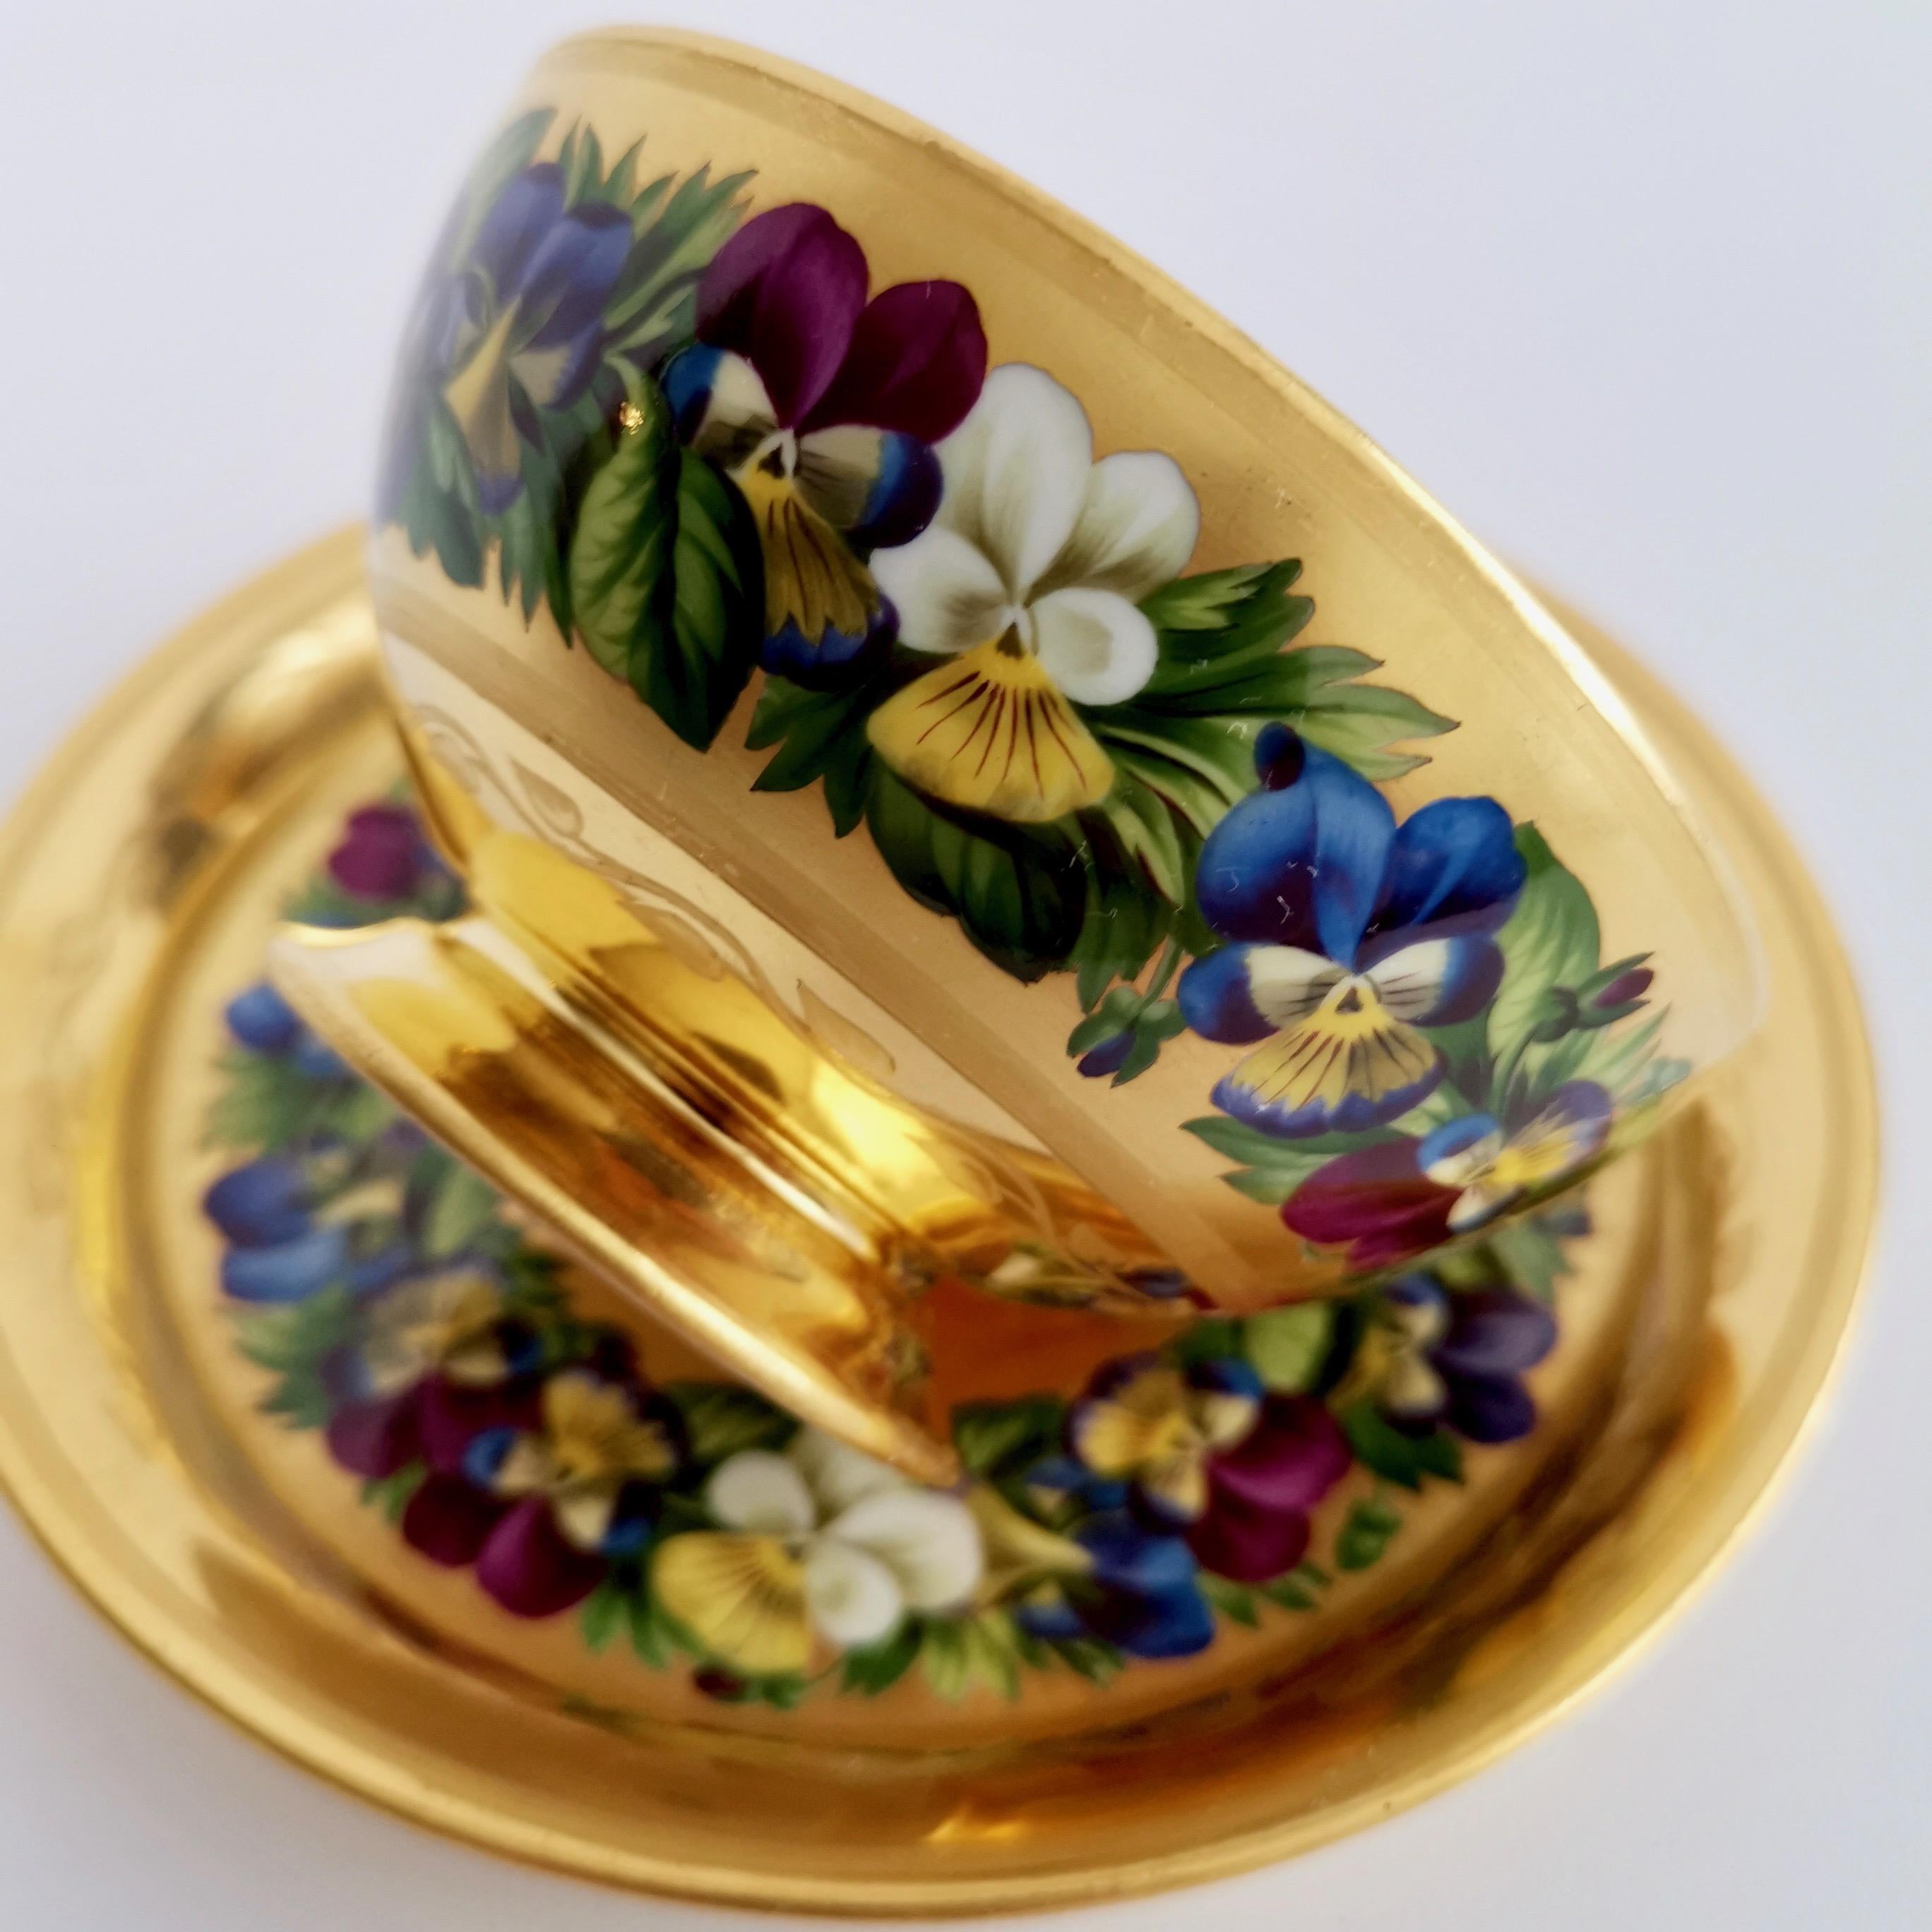 Hand-Painted Vienna Porcelain Teacup and Saucer, Gilt and Pansies by Anton Friedl, 1826